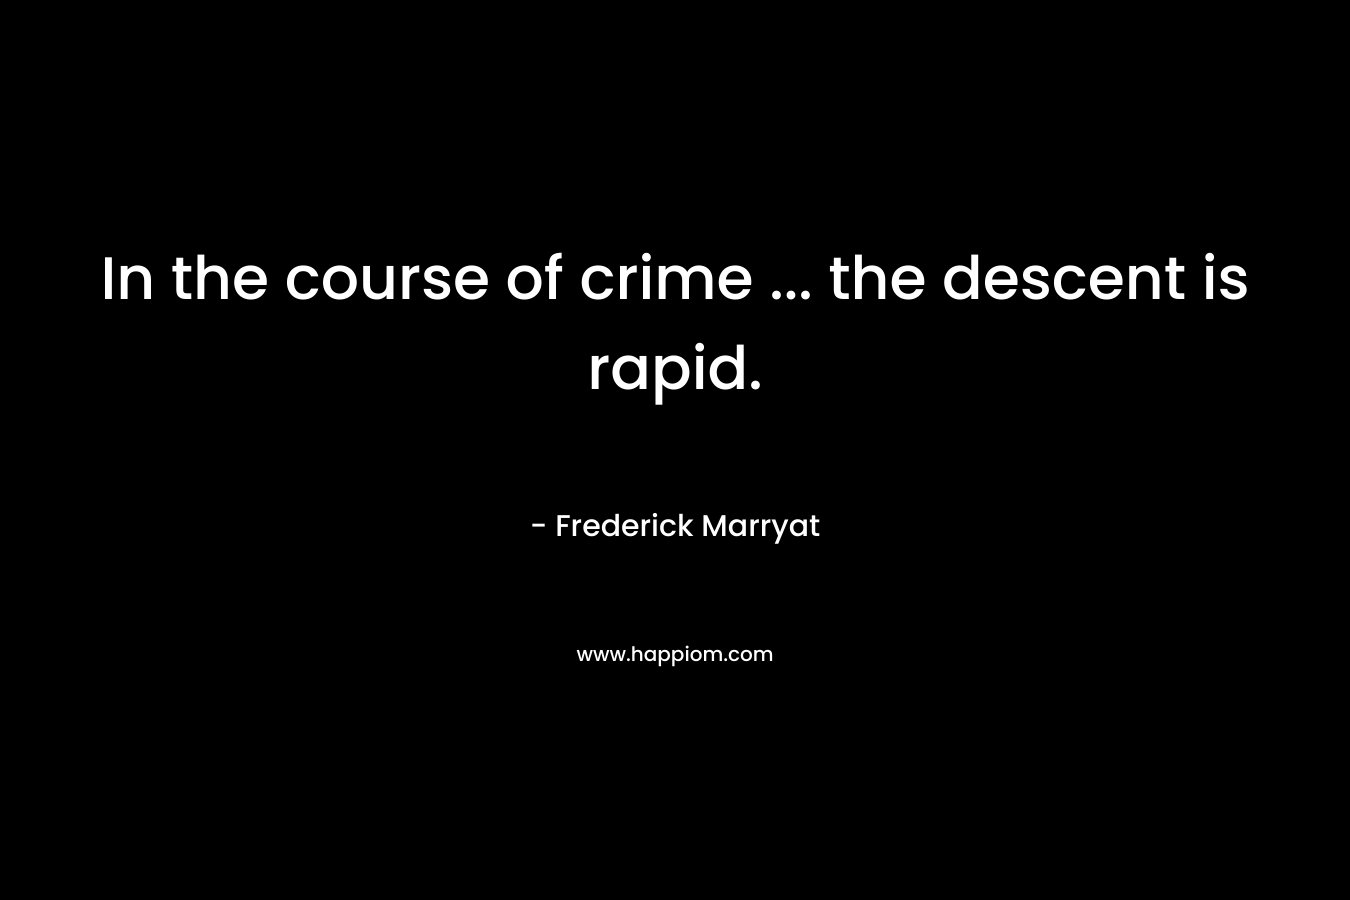 In the course of crime … the descent is rapid. – Frederick Marryat